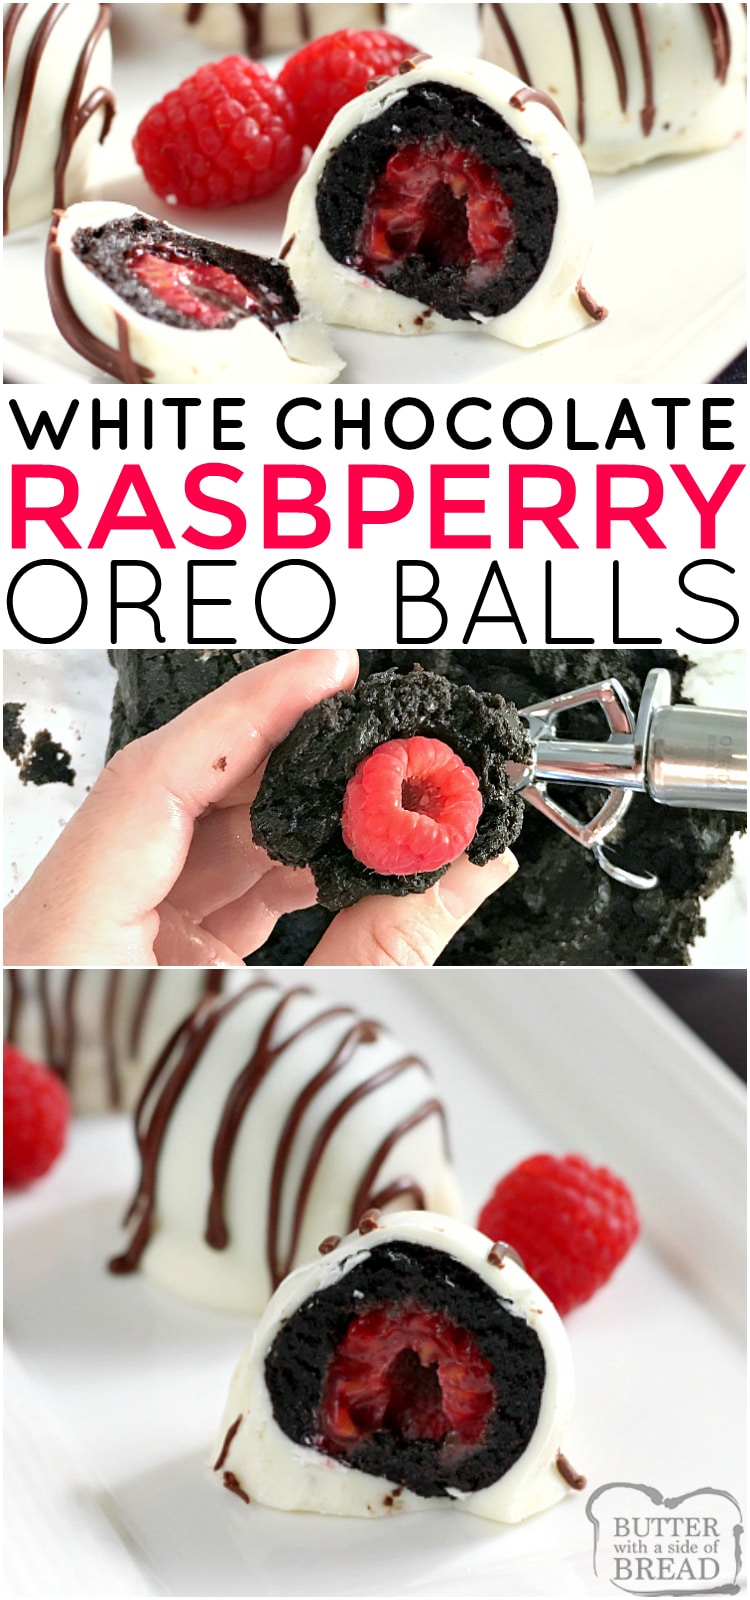 White Chocolate Raspberry Oreo Balls are a delicious no-bake treat made with Oreo cookies, cream cheese and a raspberry in the middle! These Oreo Balls are dipped in a white chocolate candy coating and coated with a chocolate drizzle.